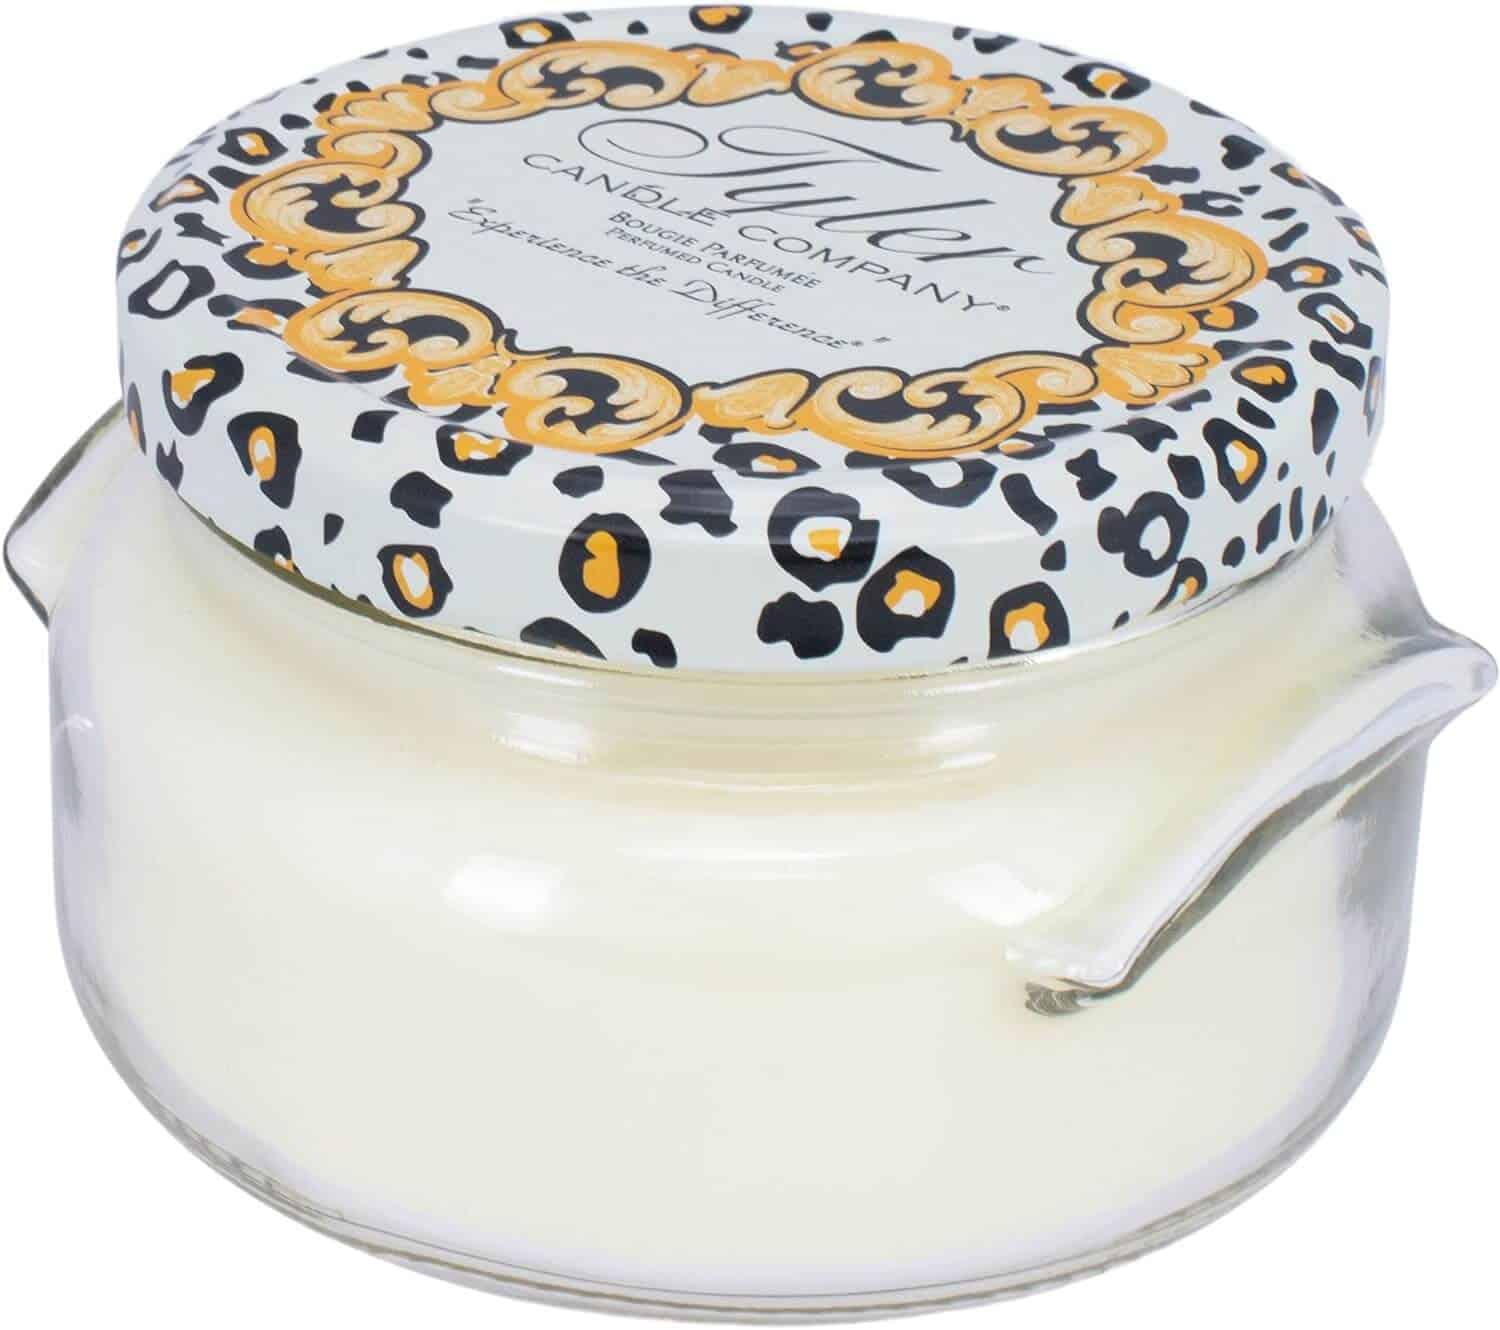 Tyler Dolce Vita Candle